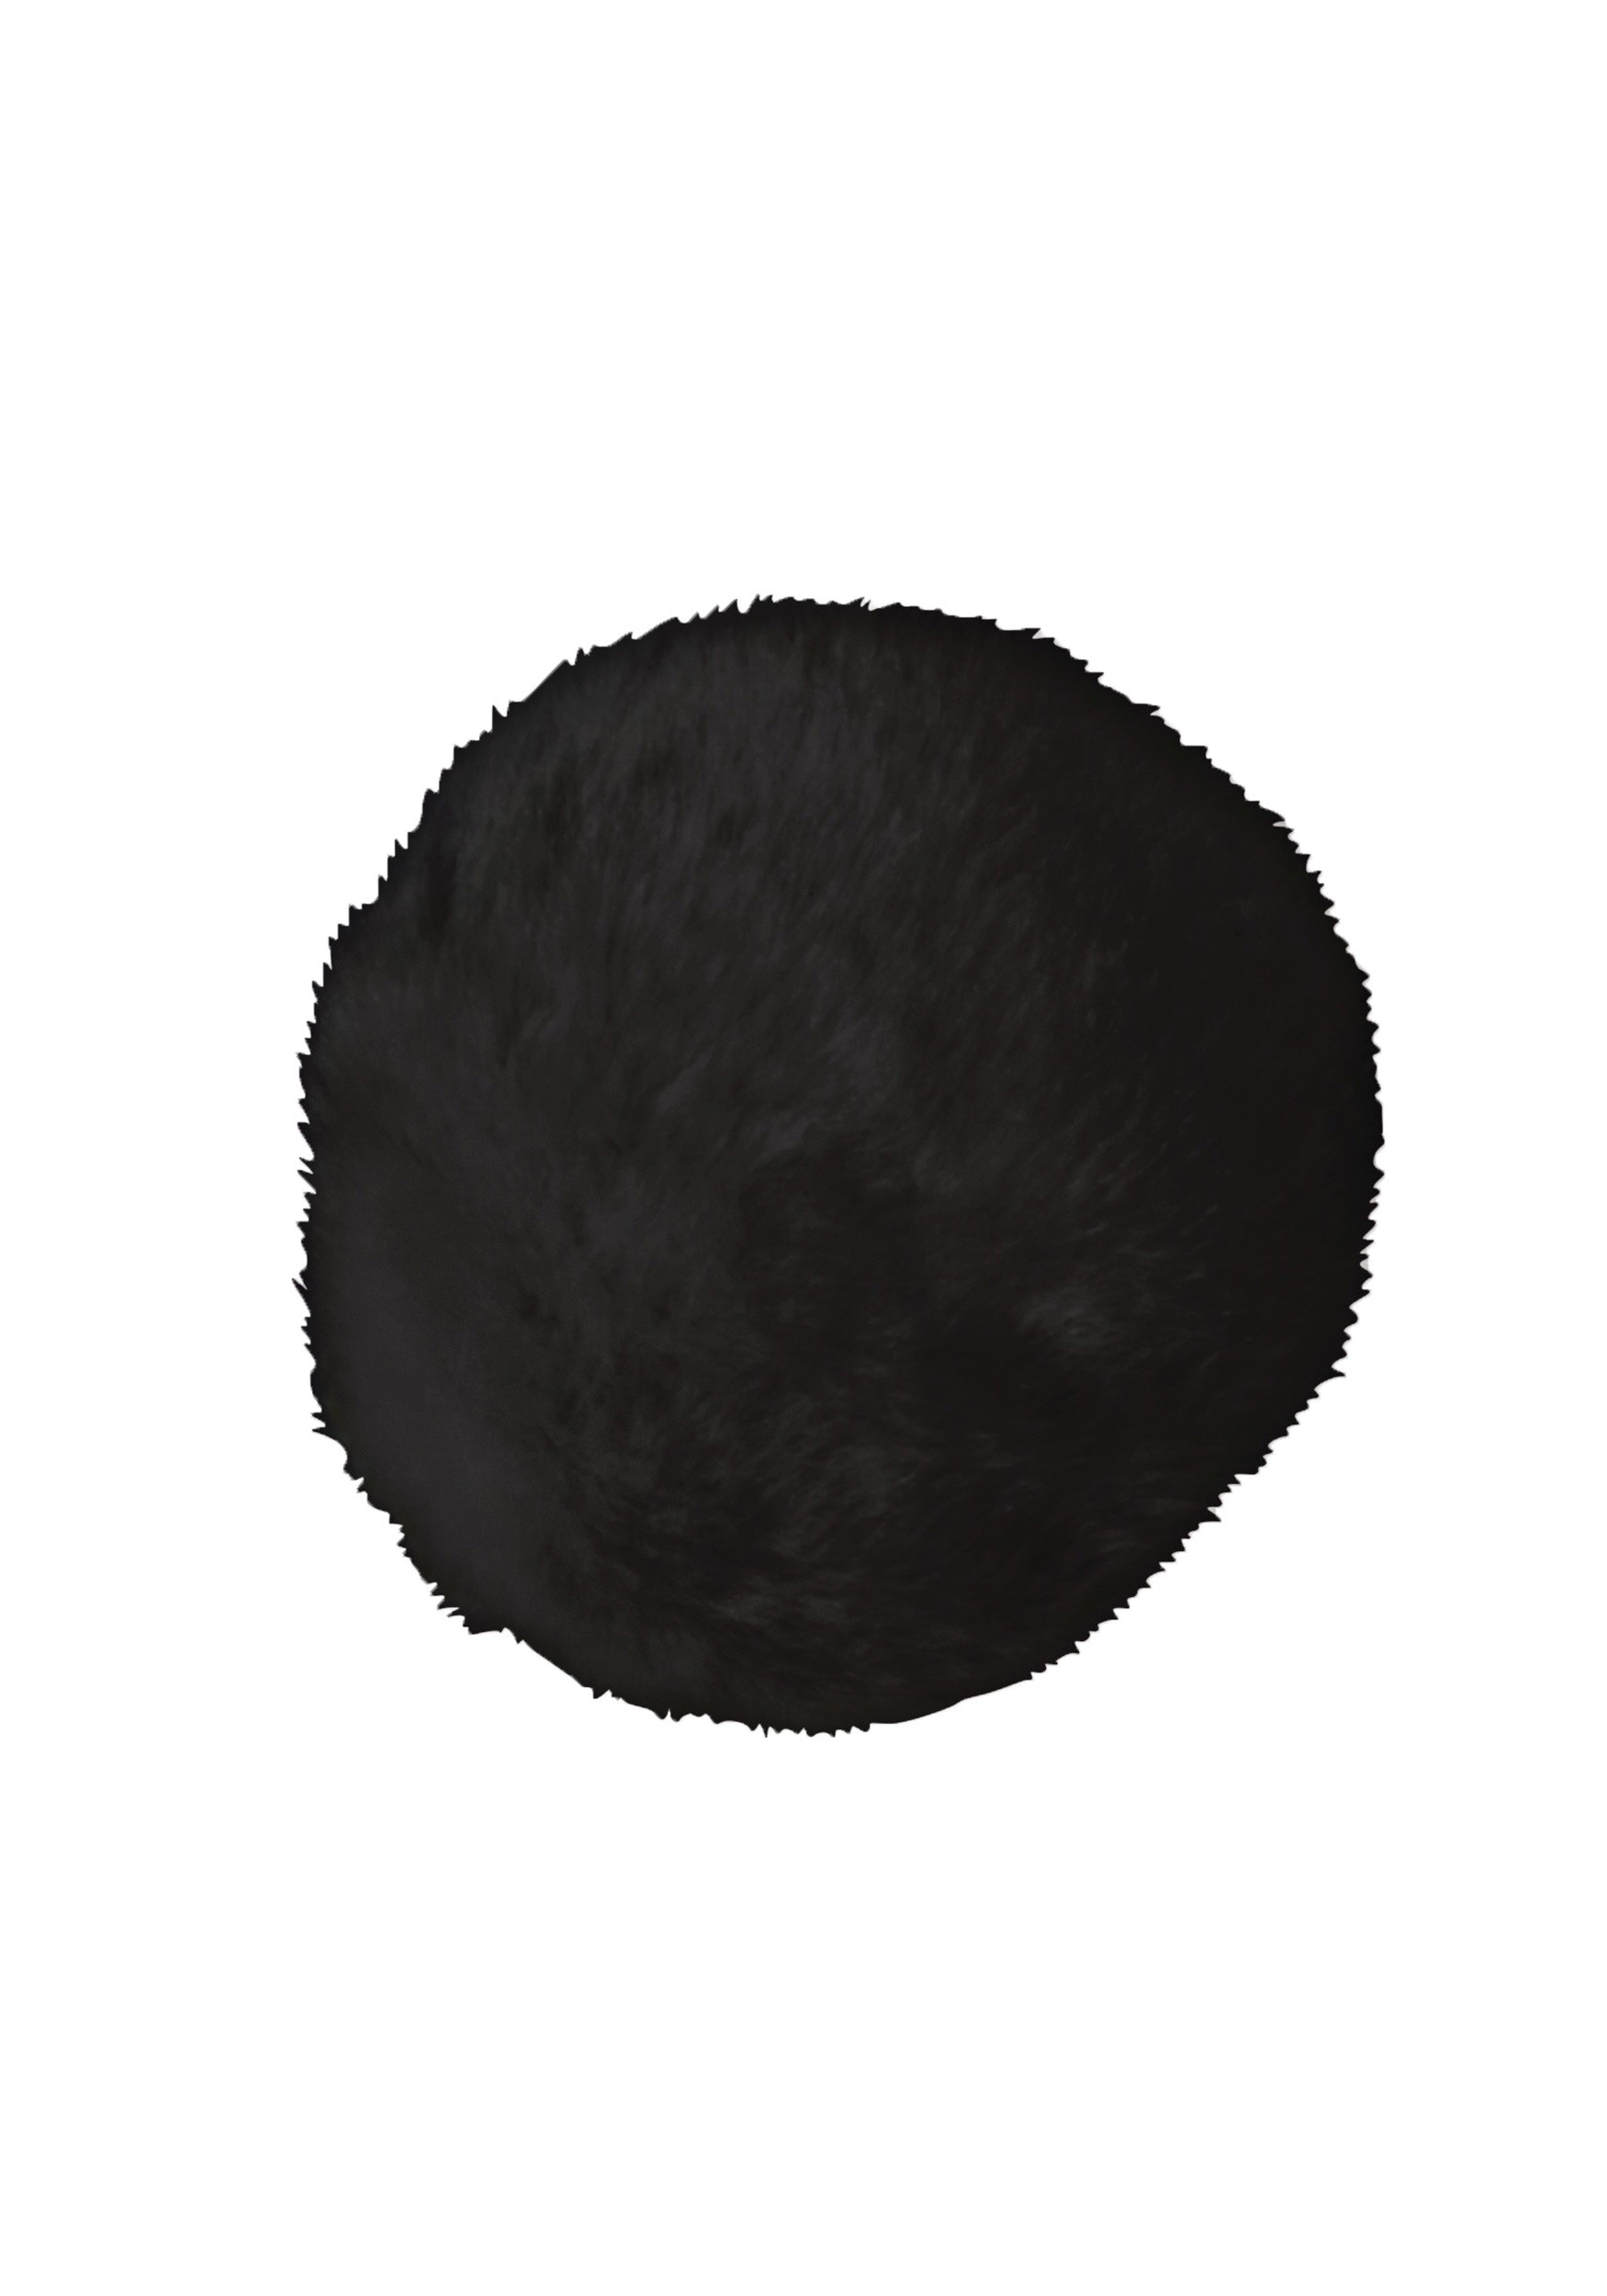 Deluxe Black Faux Fur Bunny Tail Accessory